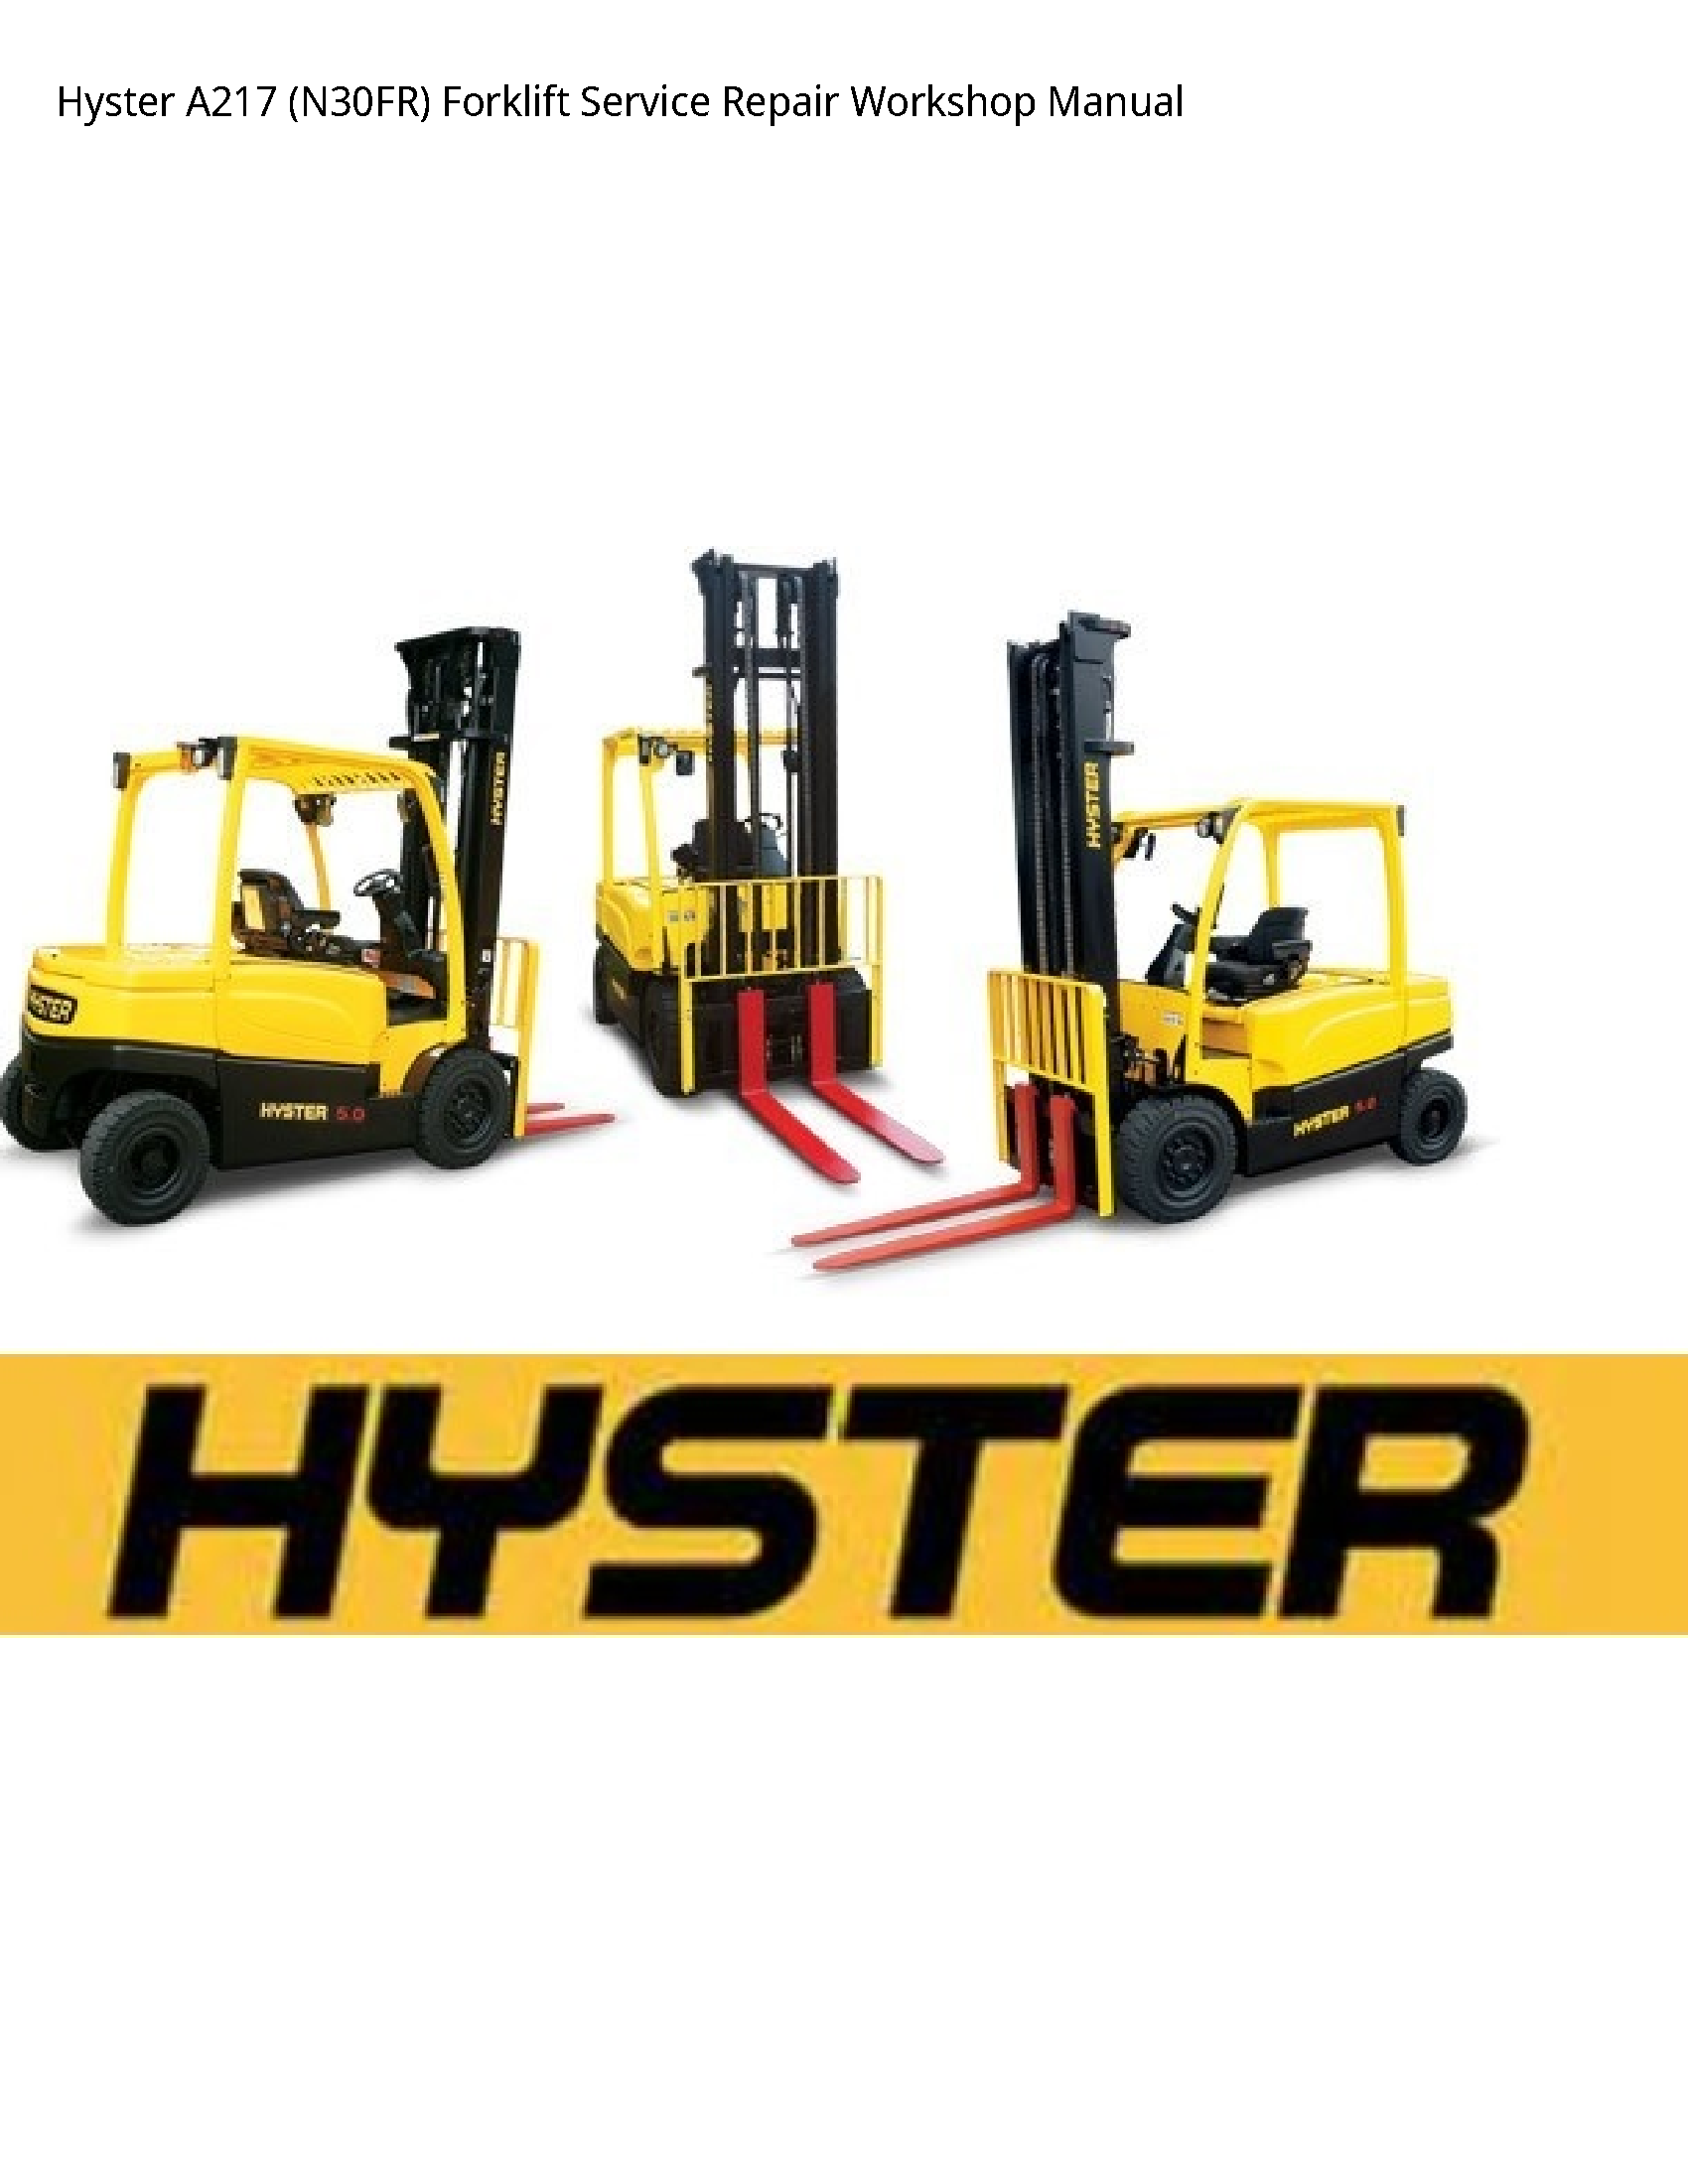 Hyster A217 Forklift manual